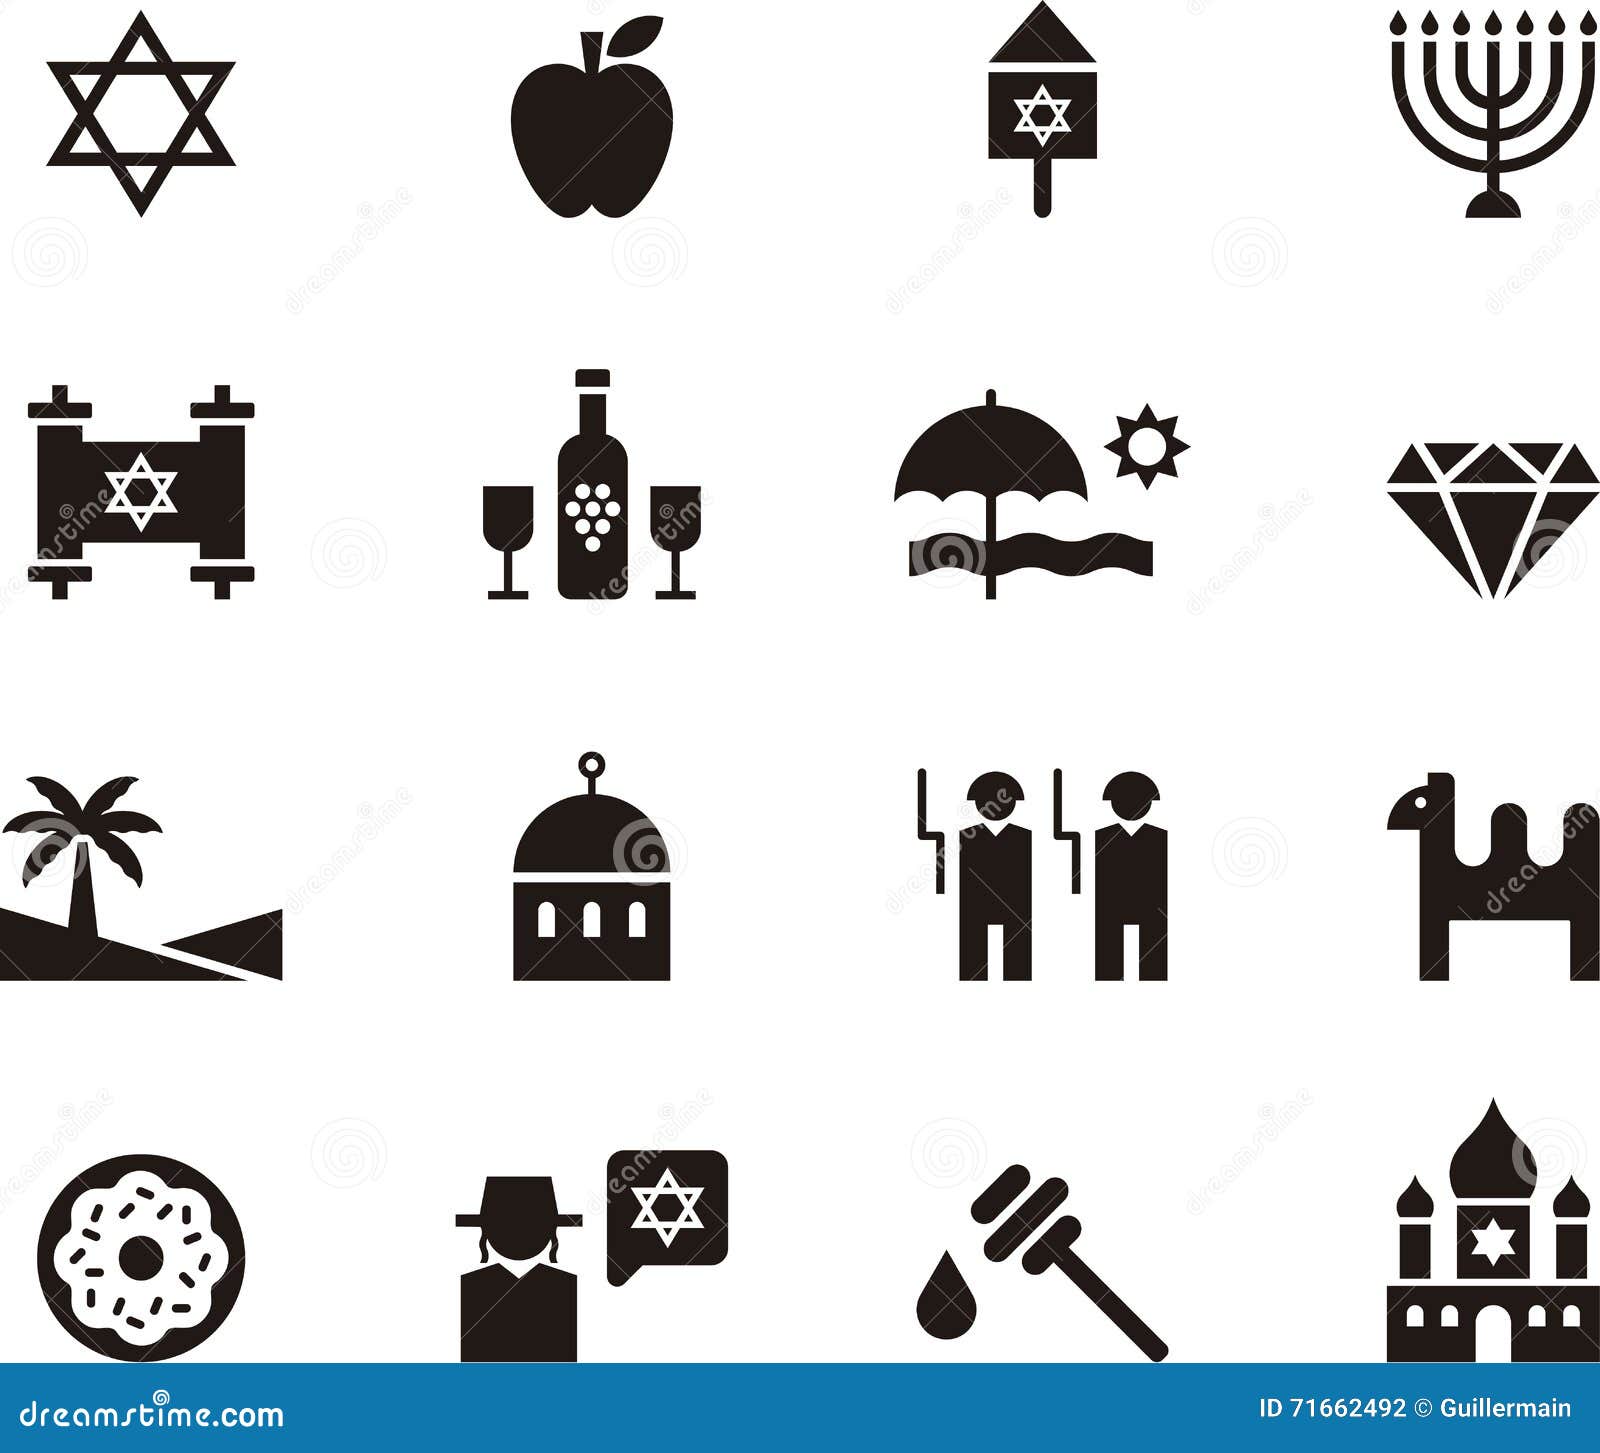 israel and judaism icon set